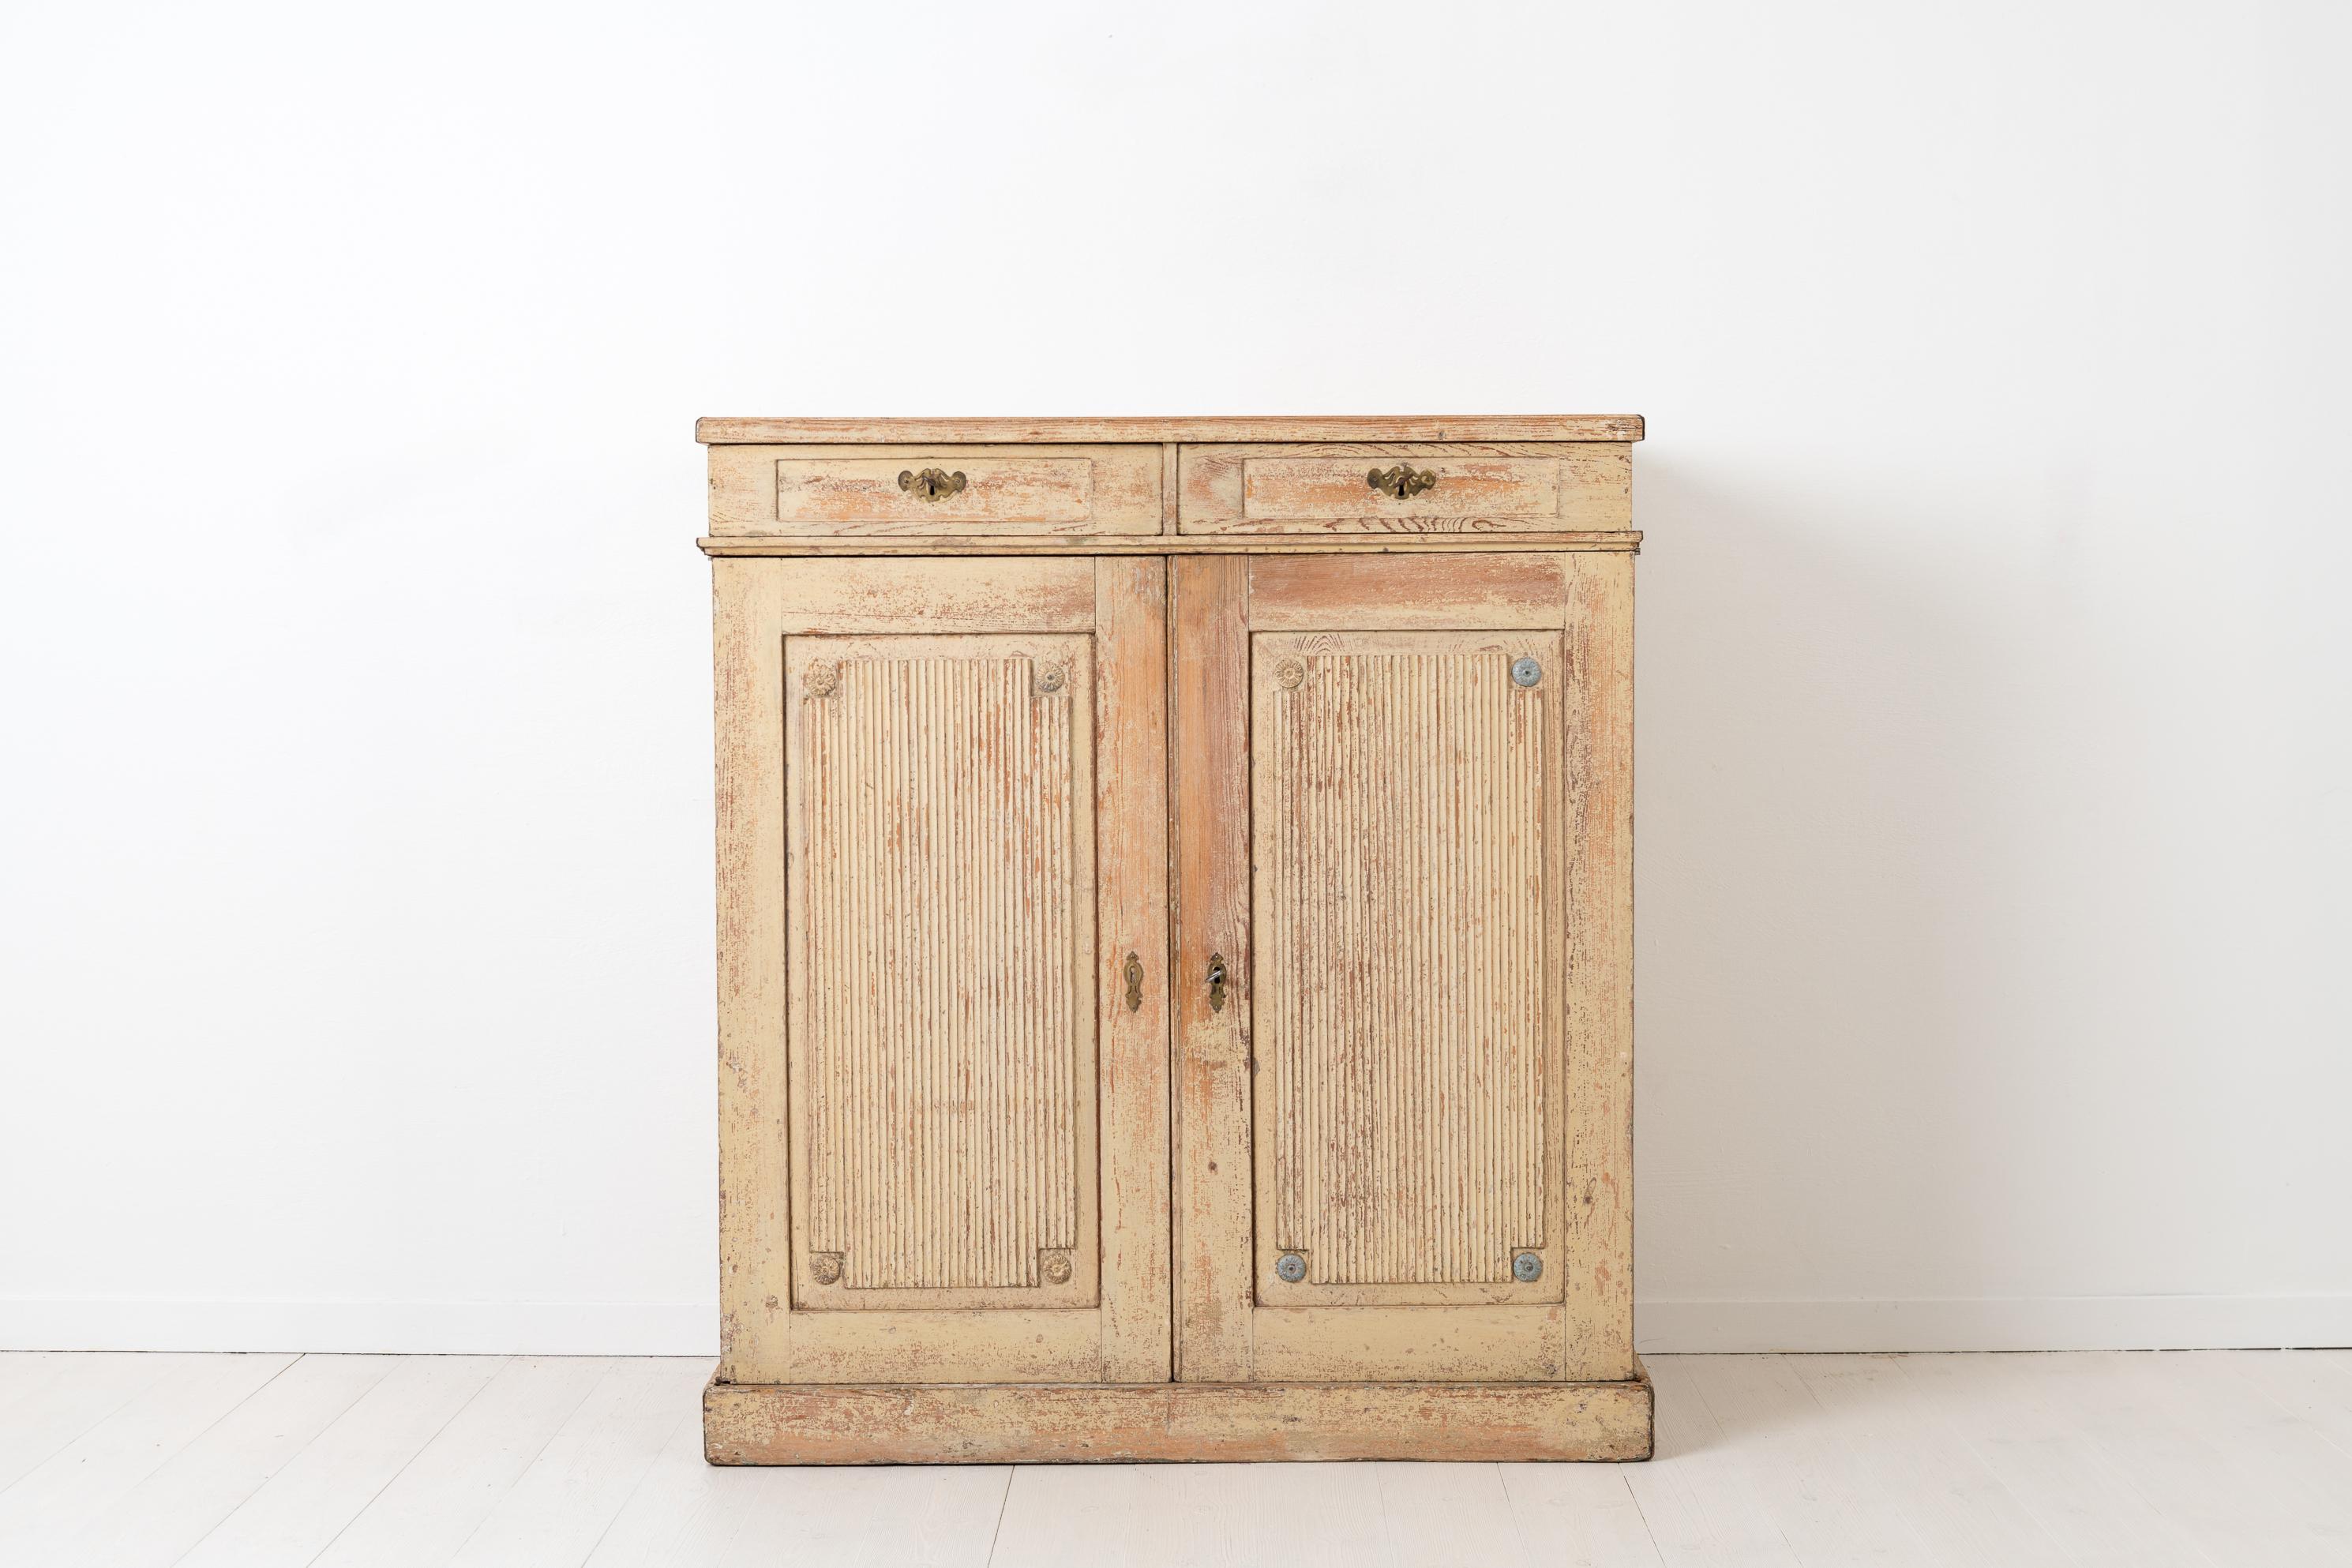 Gustavian sideboard from Sweden made circa 1800-1810. The sideboard is from the end of the Gustavian period and has original distressed paint and original hardware. Made in pine and hand scraped to original paint from the first years of the 19th